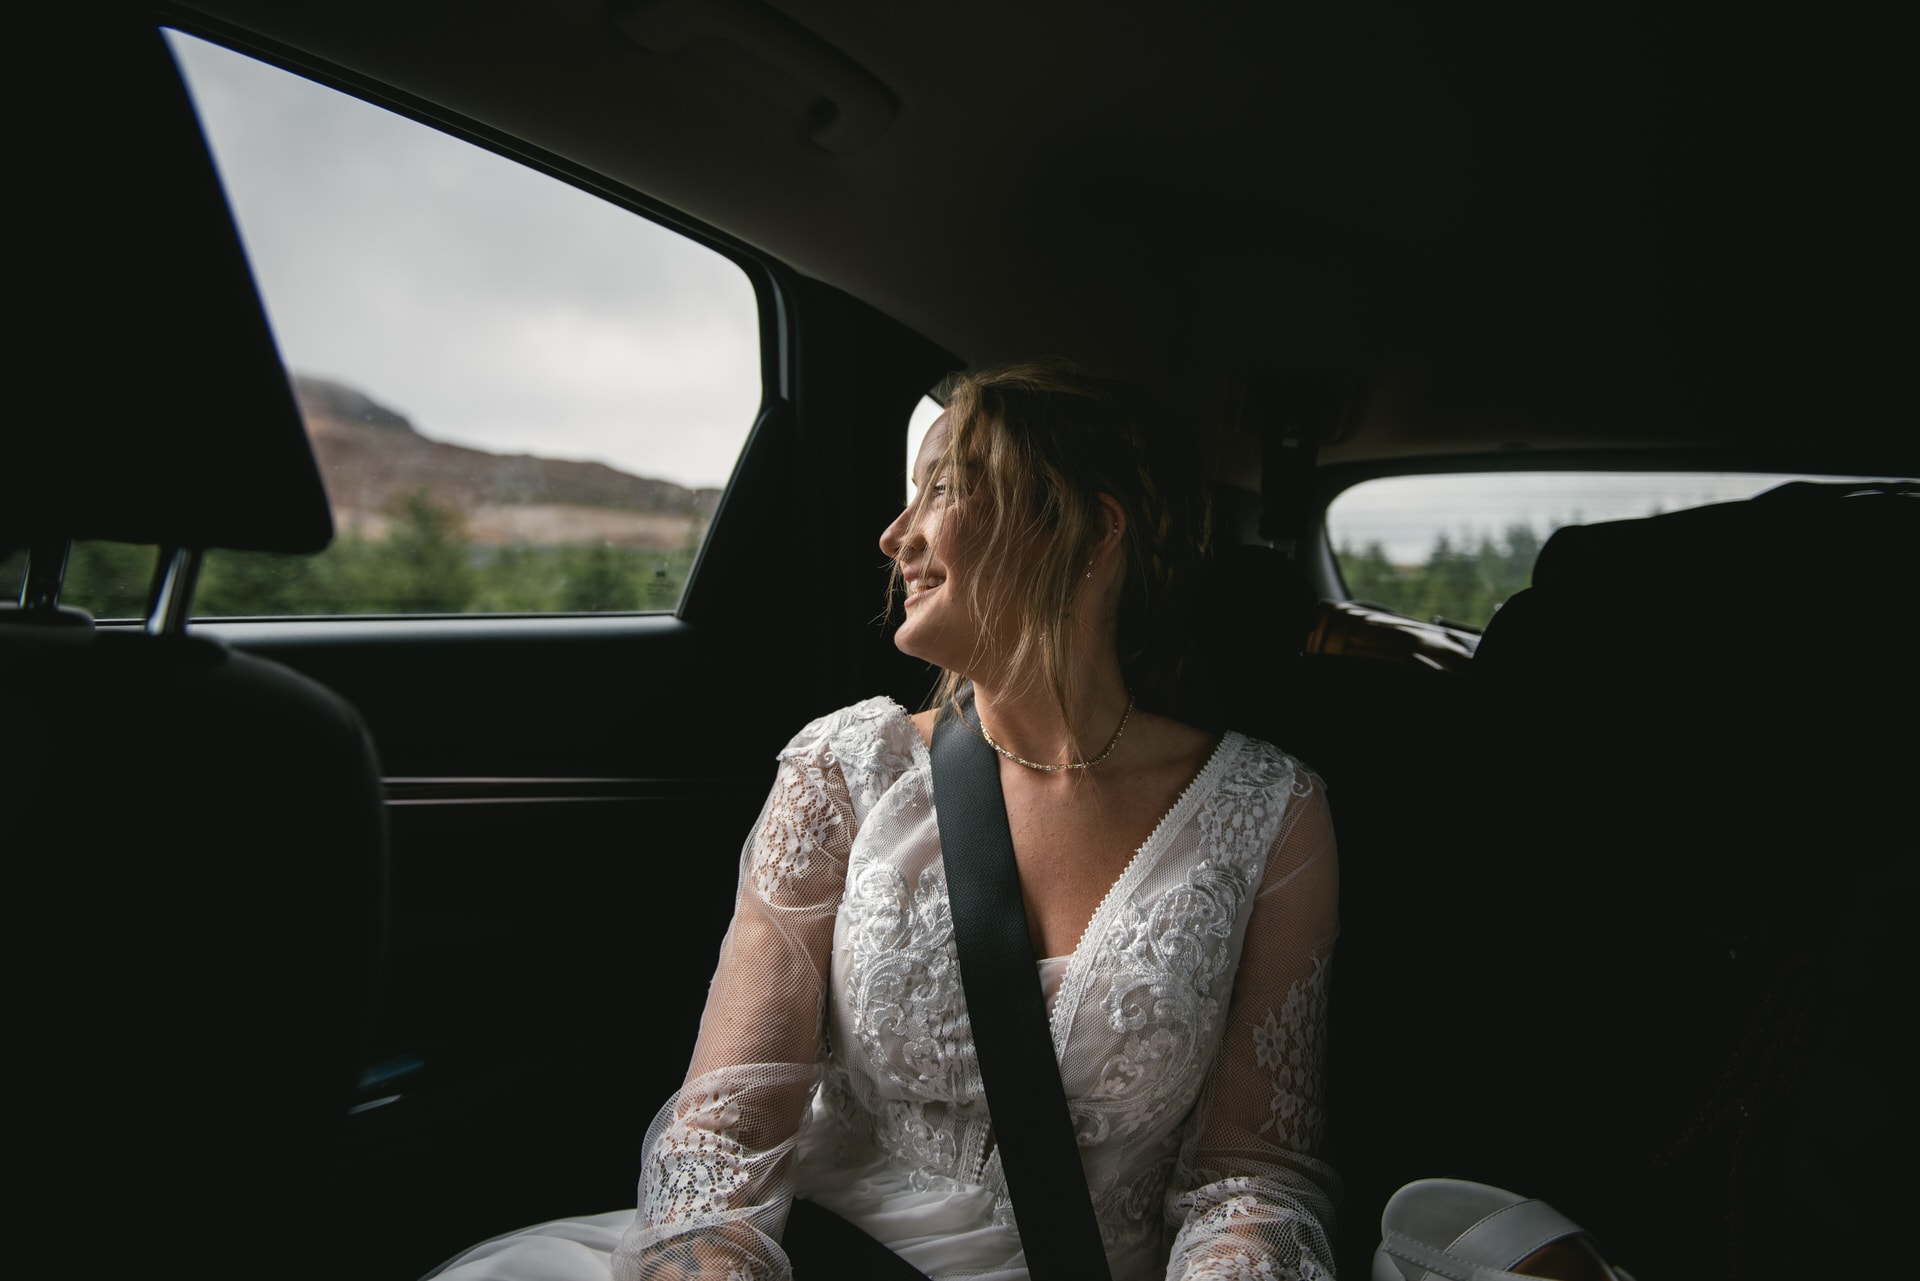 A genuine smile lights up the bride's face as she rides in the car, en route to her Iceland Westfjords elopement destination.